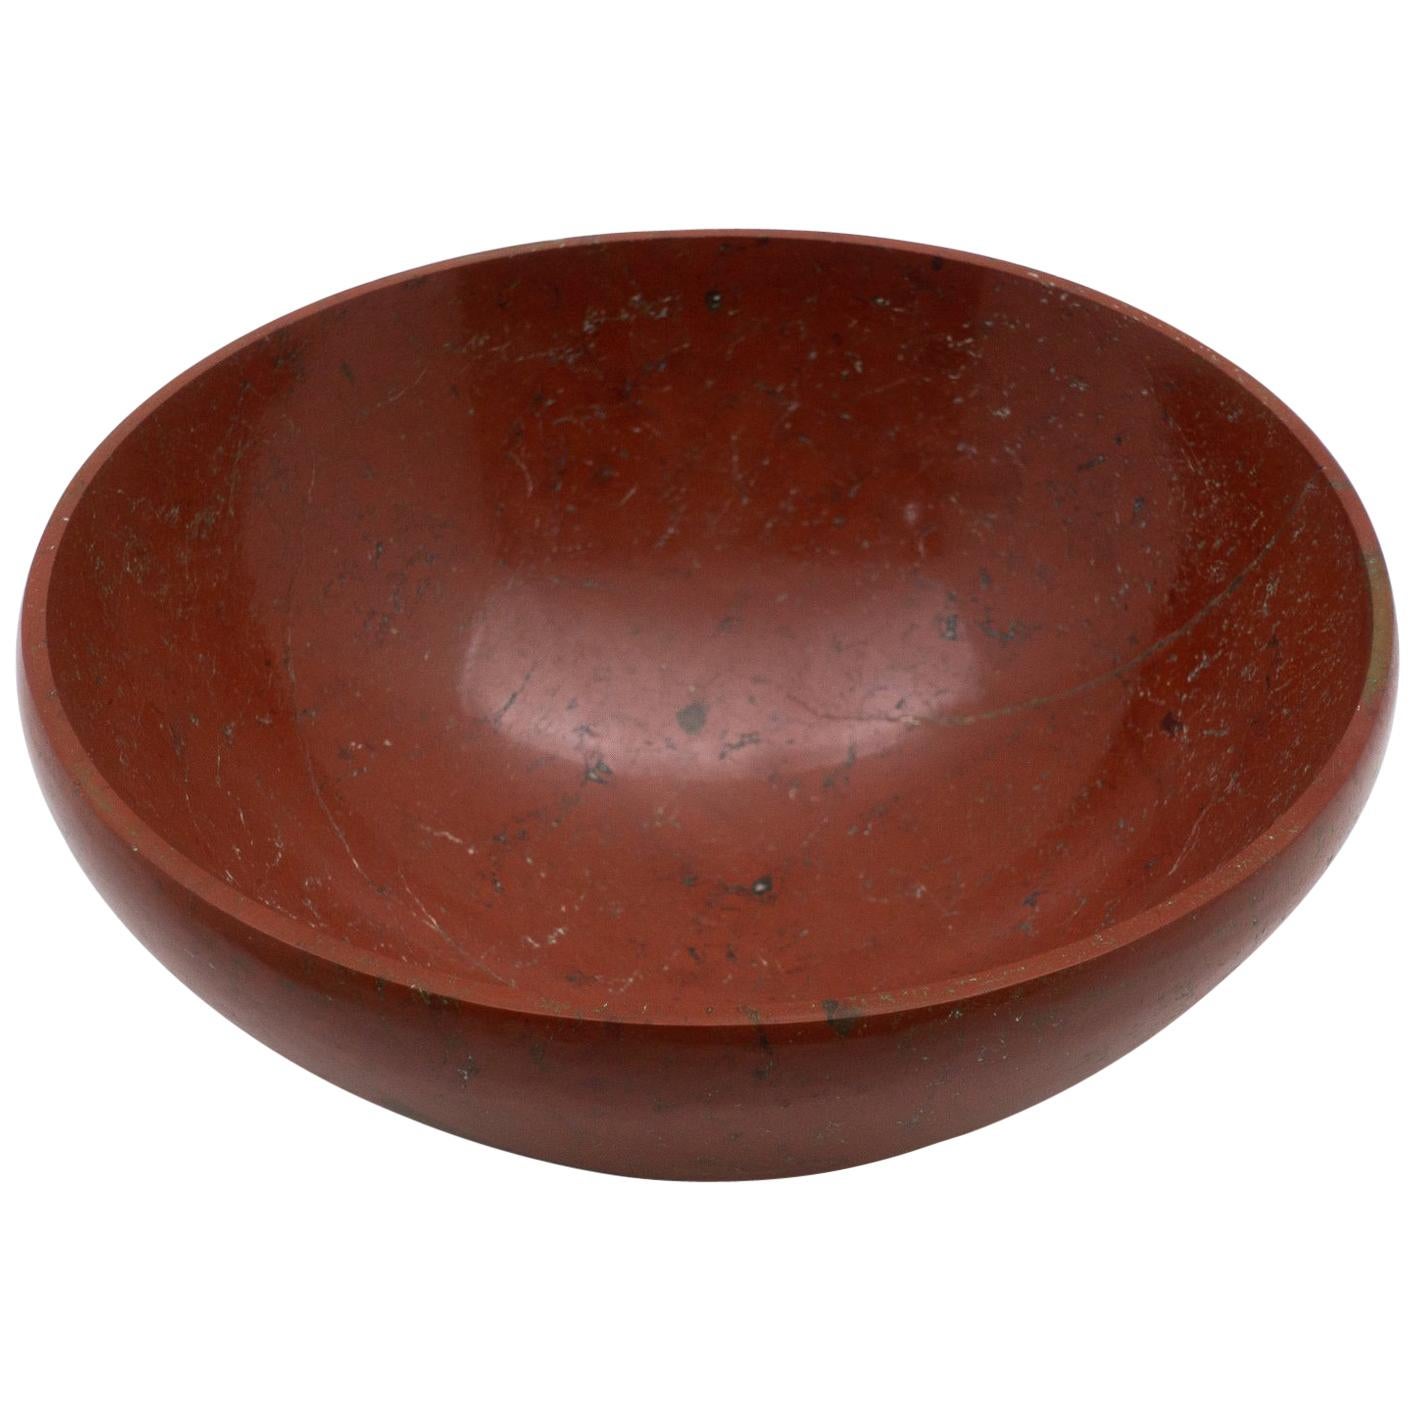 Large Hand-Carved Red Jasper Bowl from India